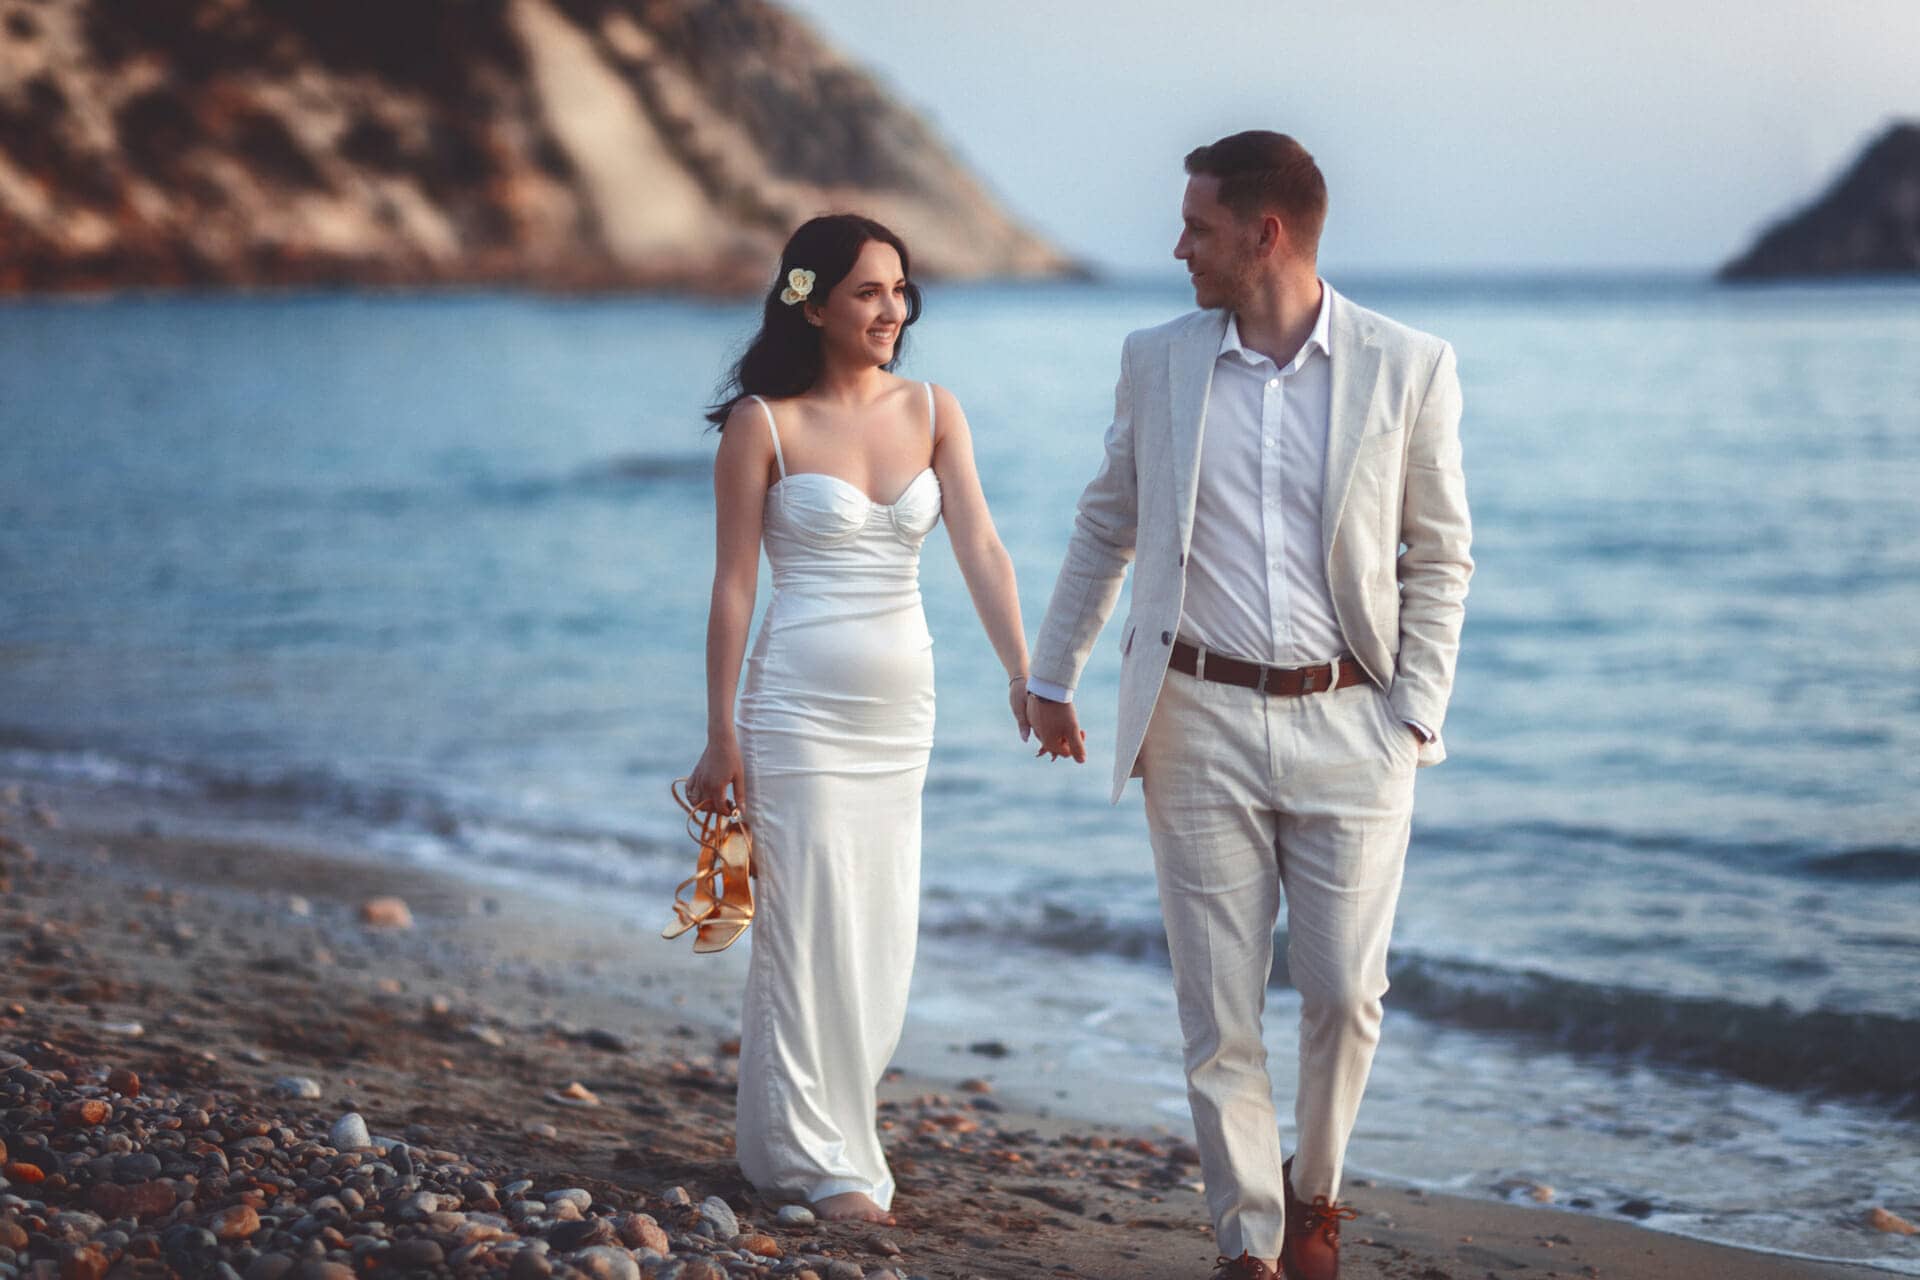 image of a couple walking on the beach with photographer in ibiza